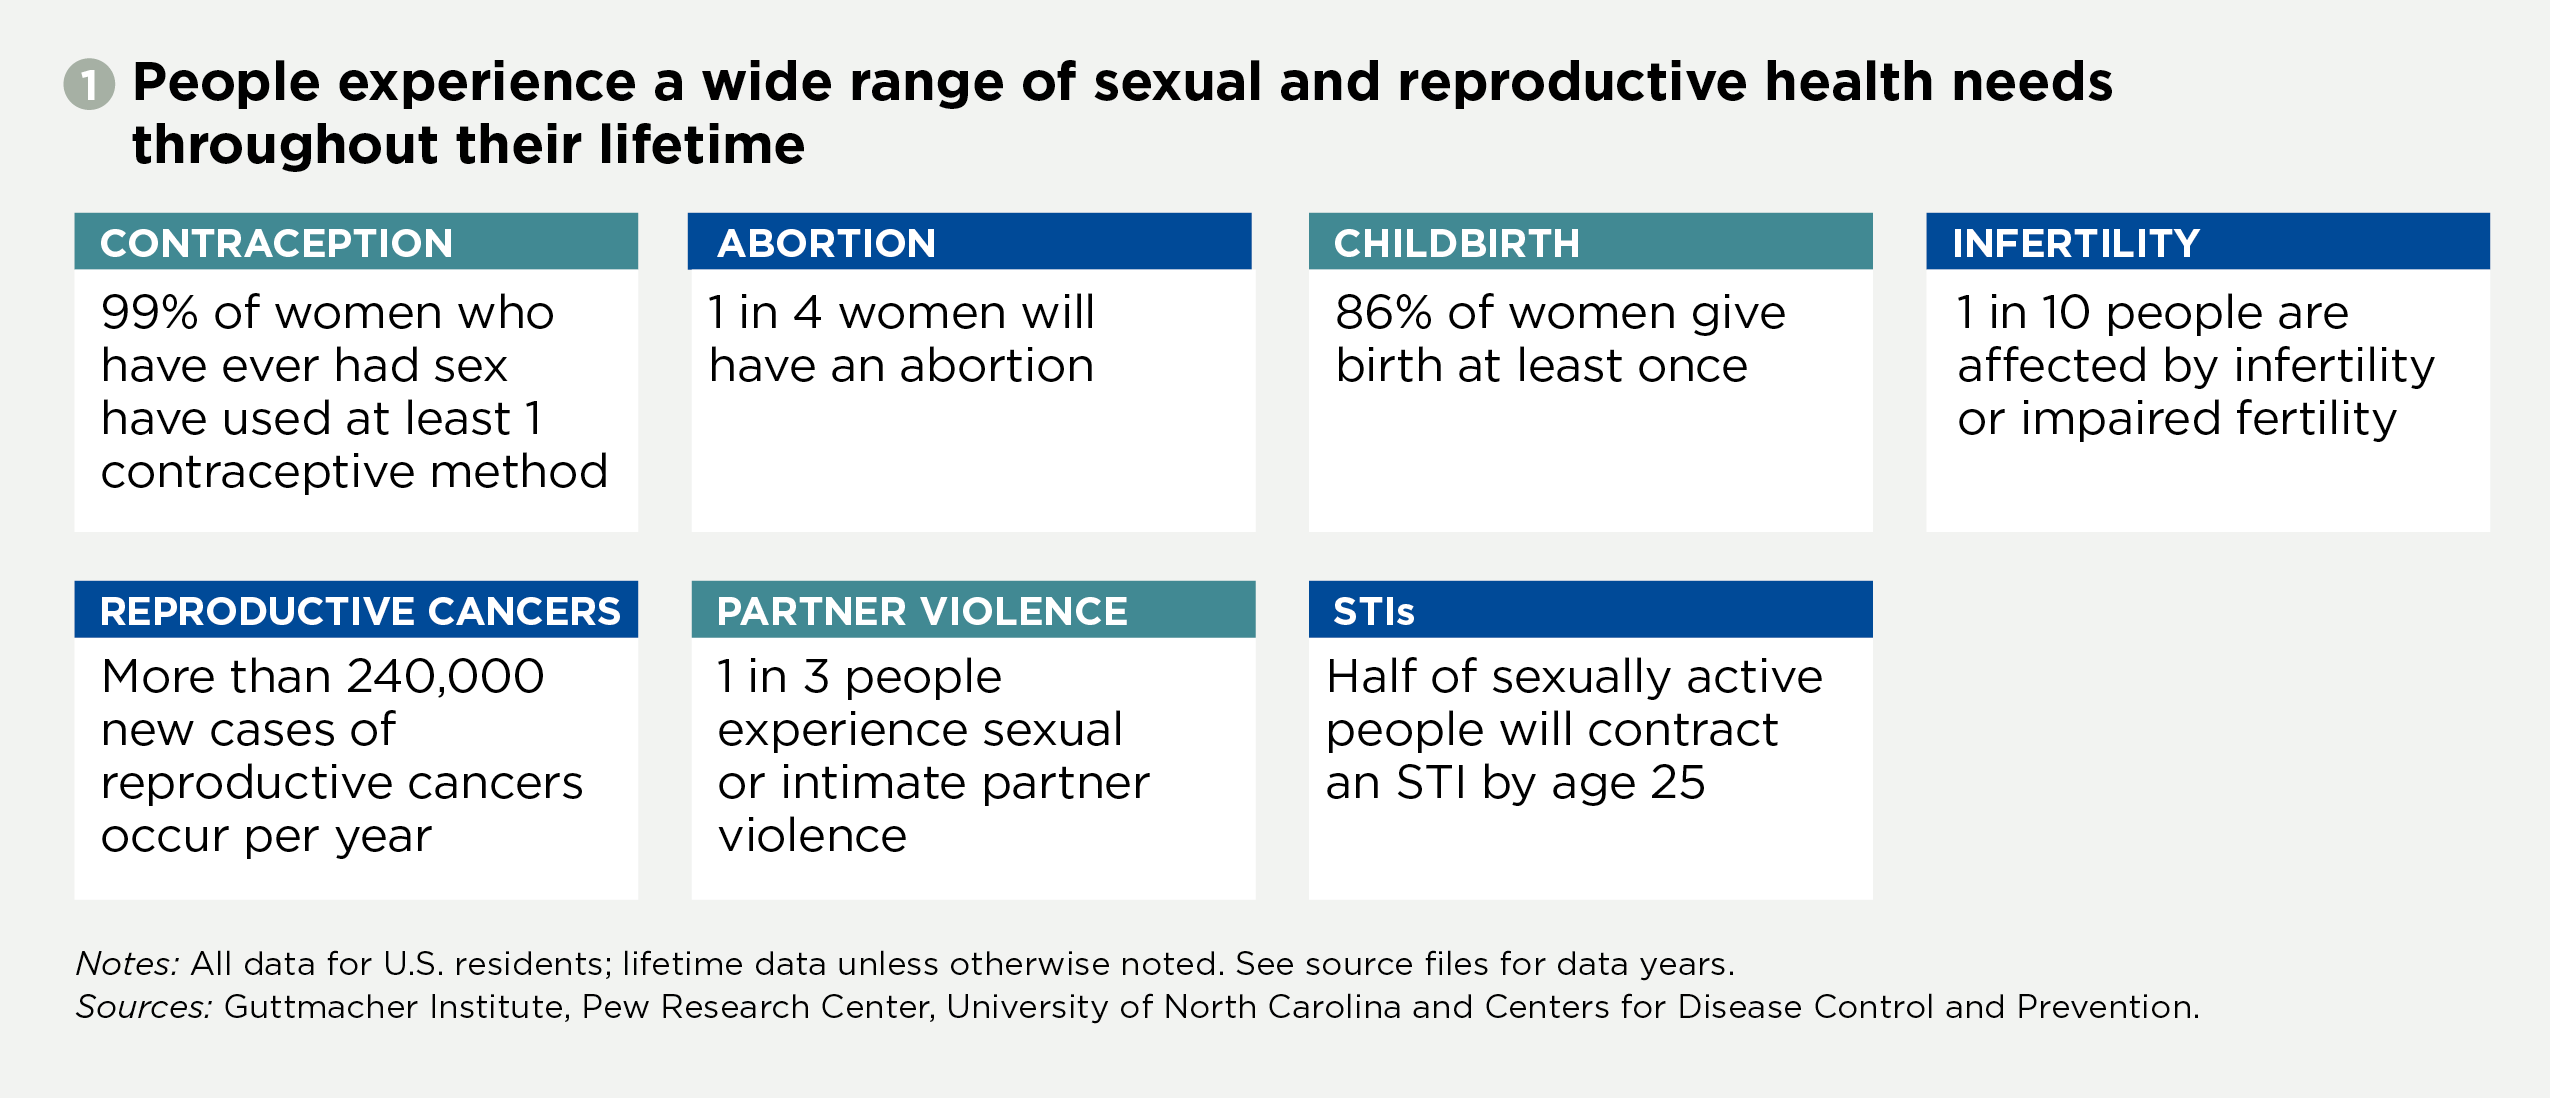 More To Be Done Individuals’ Needs For Sexual And Reproductive Health Coverage And Care